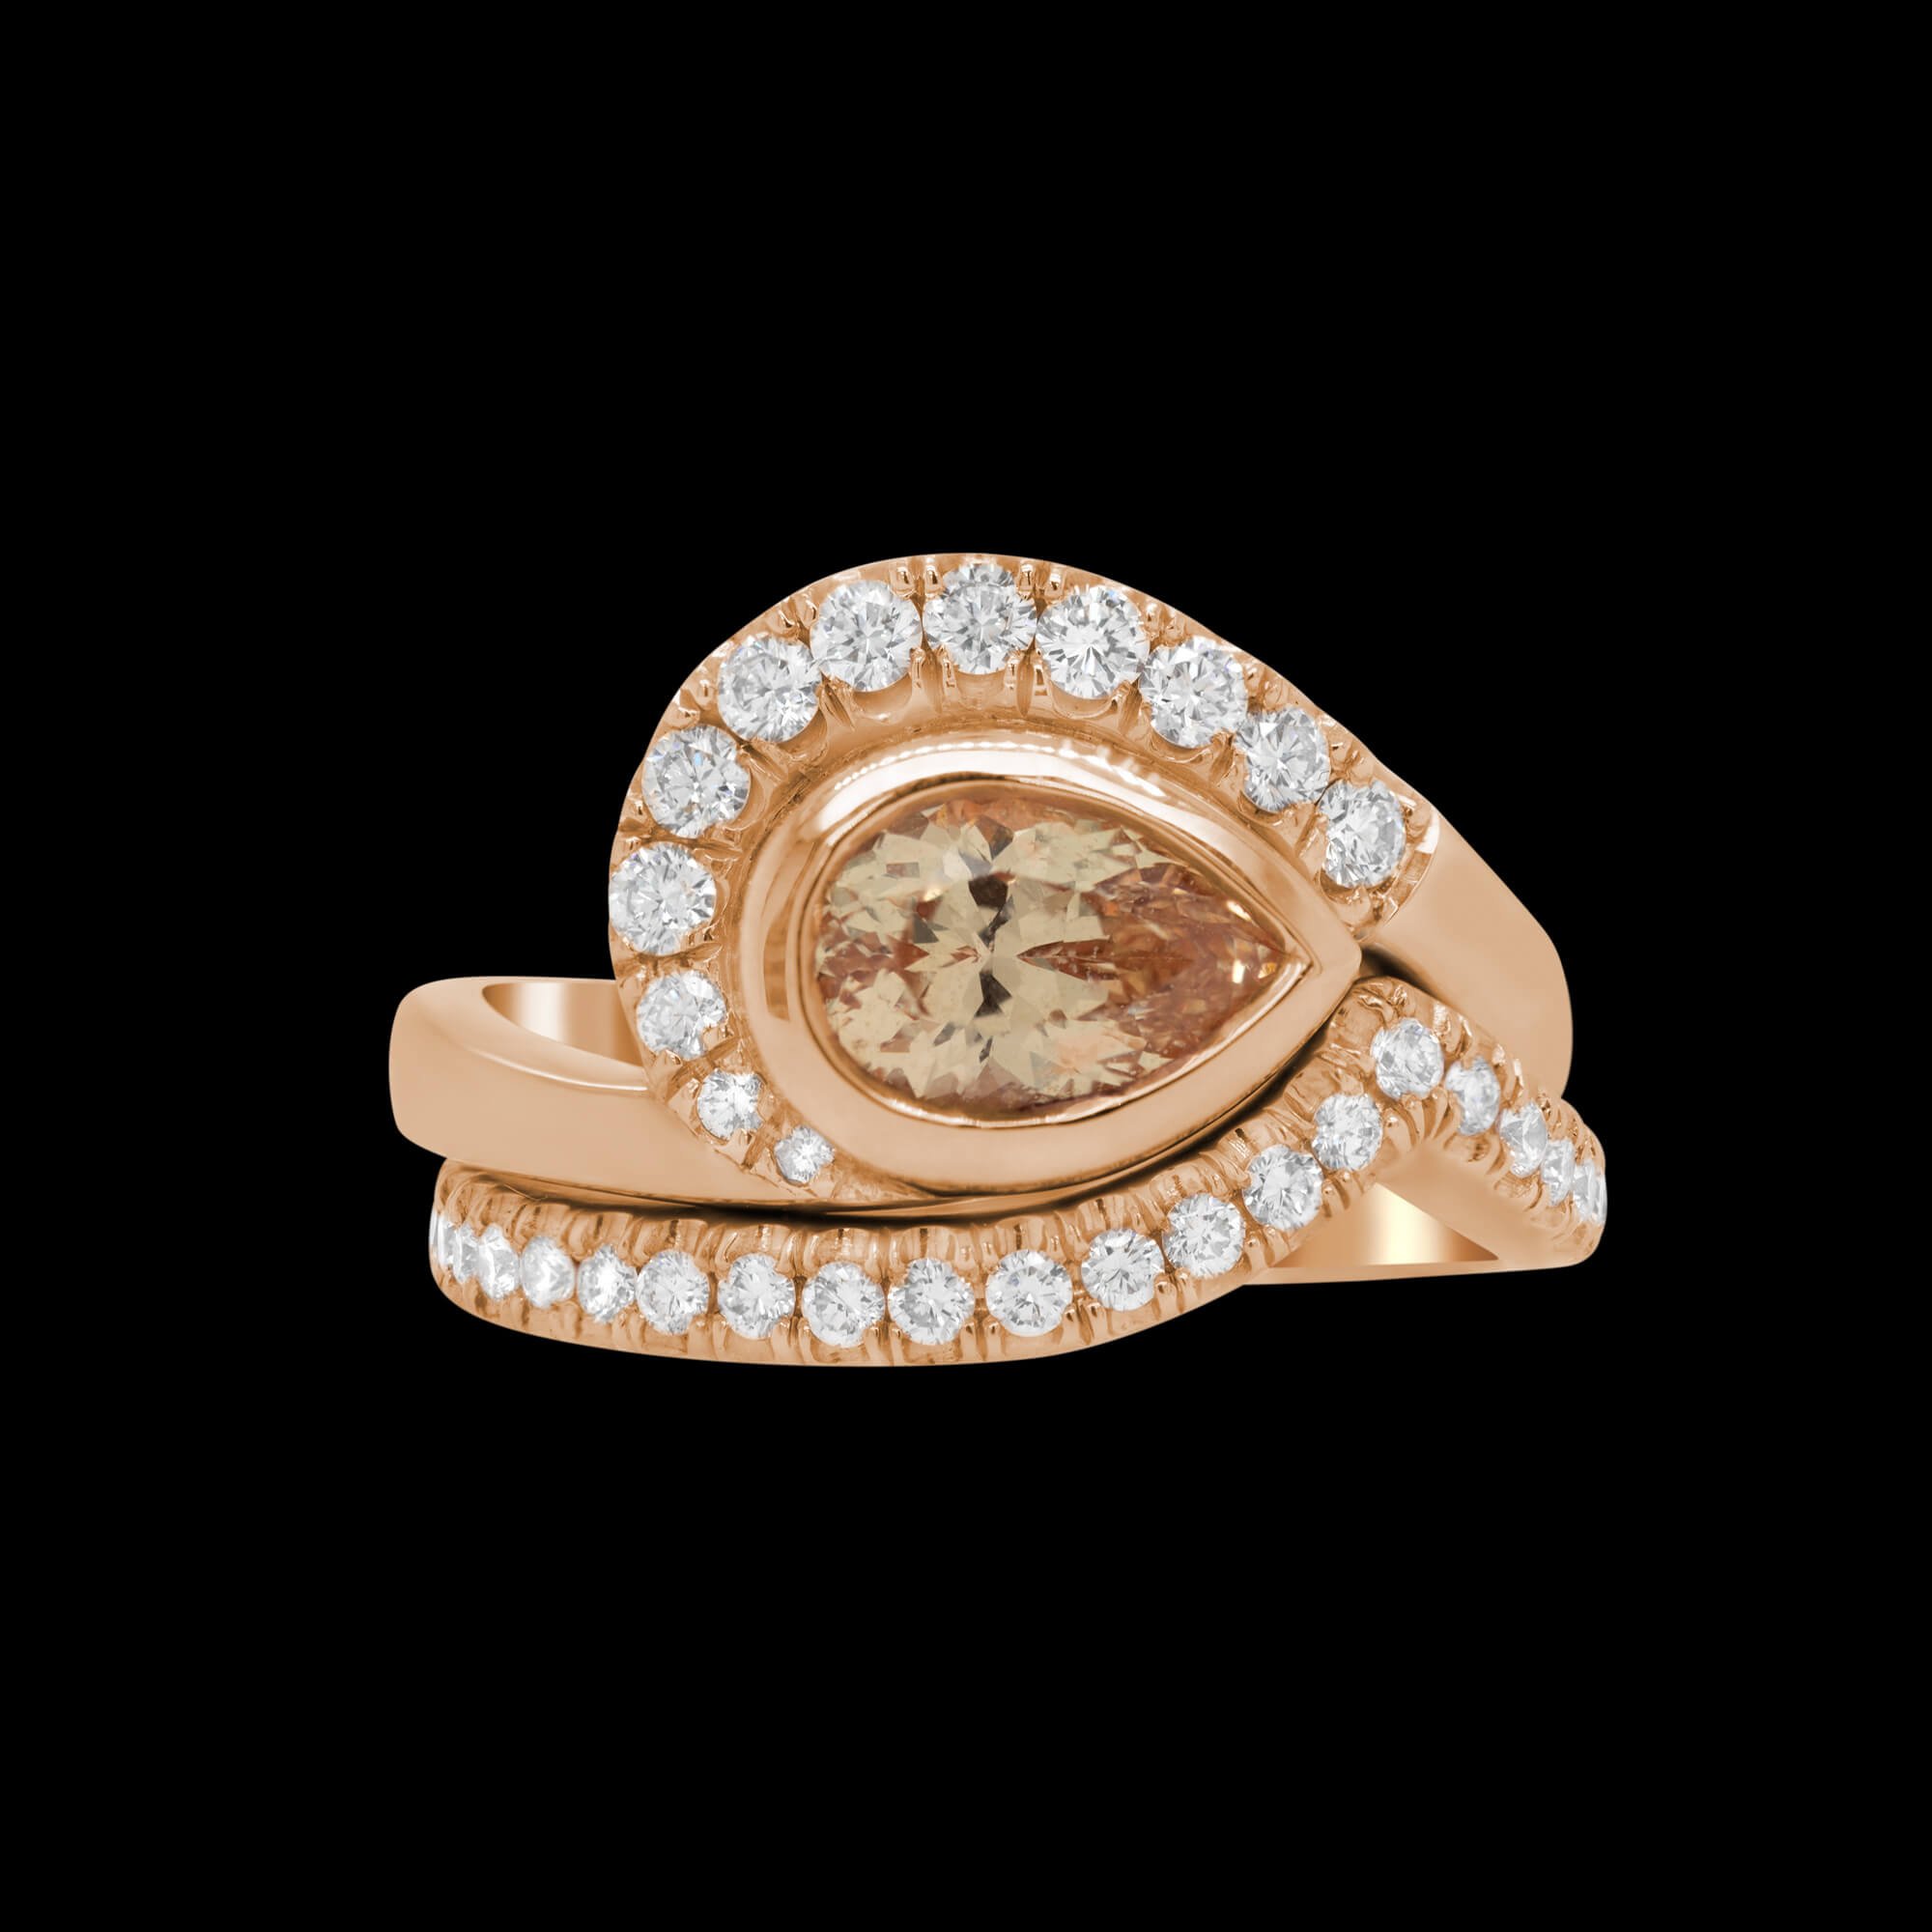 Custom 18kt pink gold Petal ring and wedding band with a peach sapphire and diamonds | Signature Engagement. FRIDA | Fine Jewellery.jpg